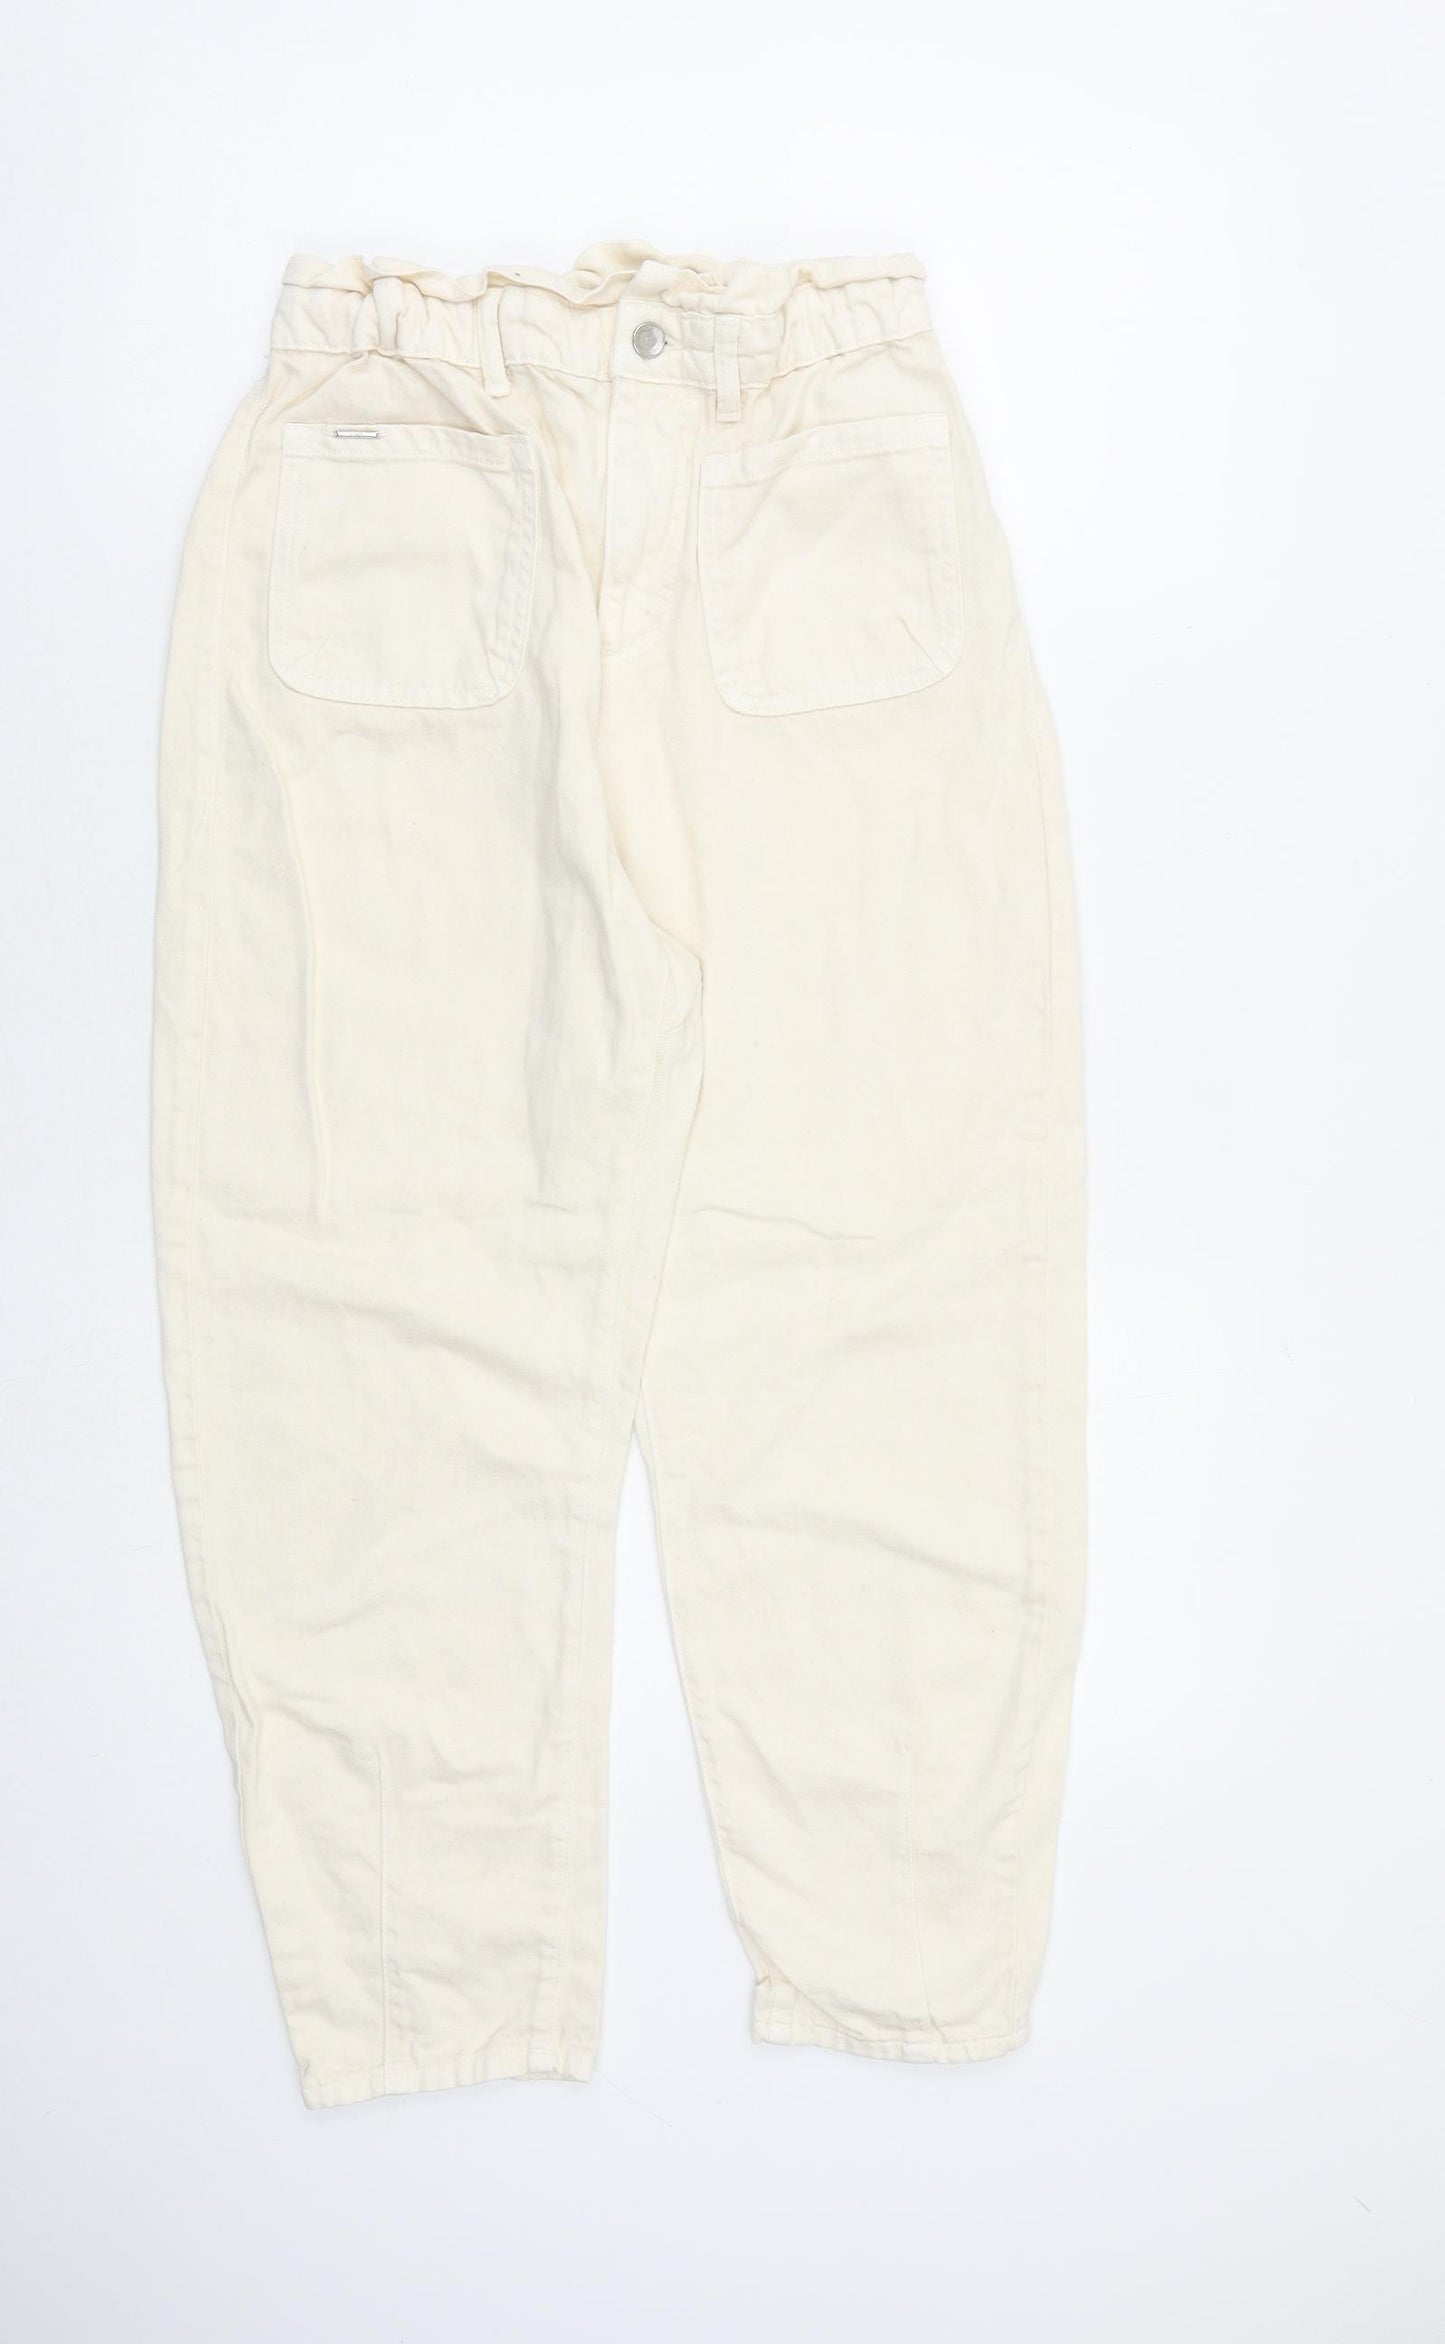 Zara Womens Ivory Cotton Tapered Jeans Size 8 L25 in Regular Zip - Barrel Style